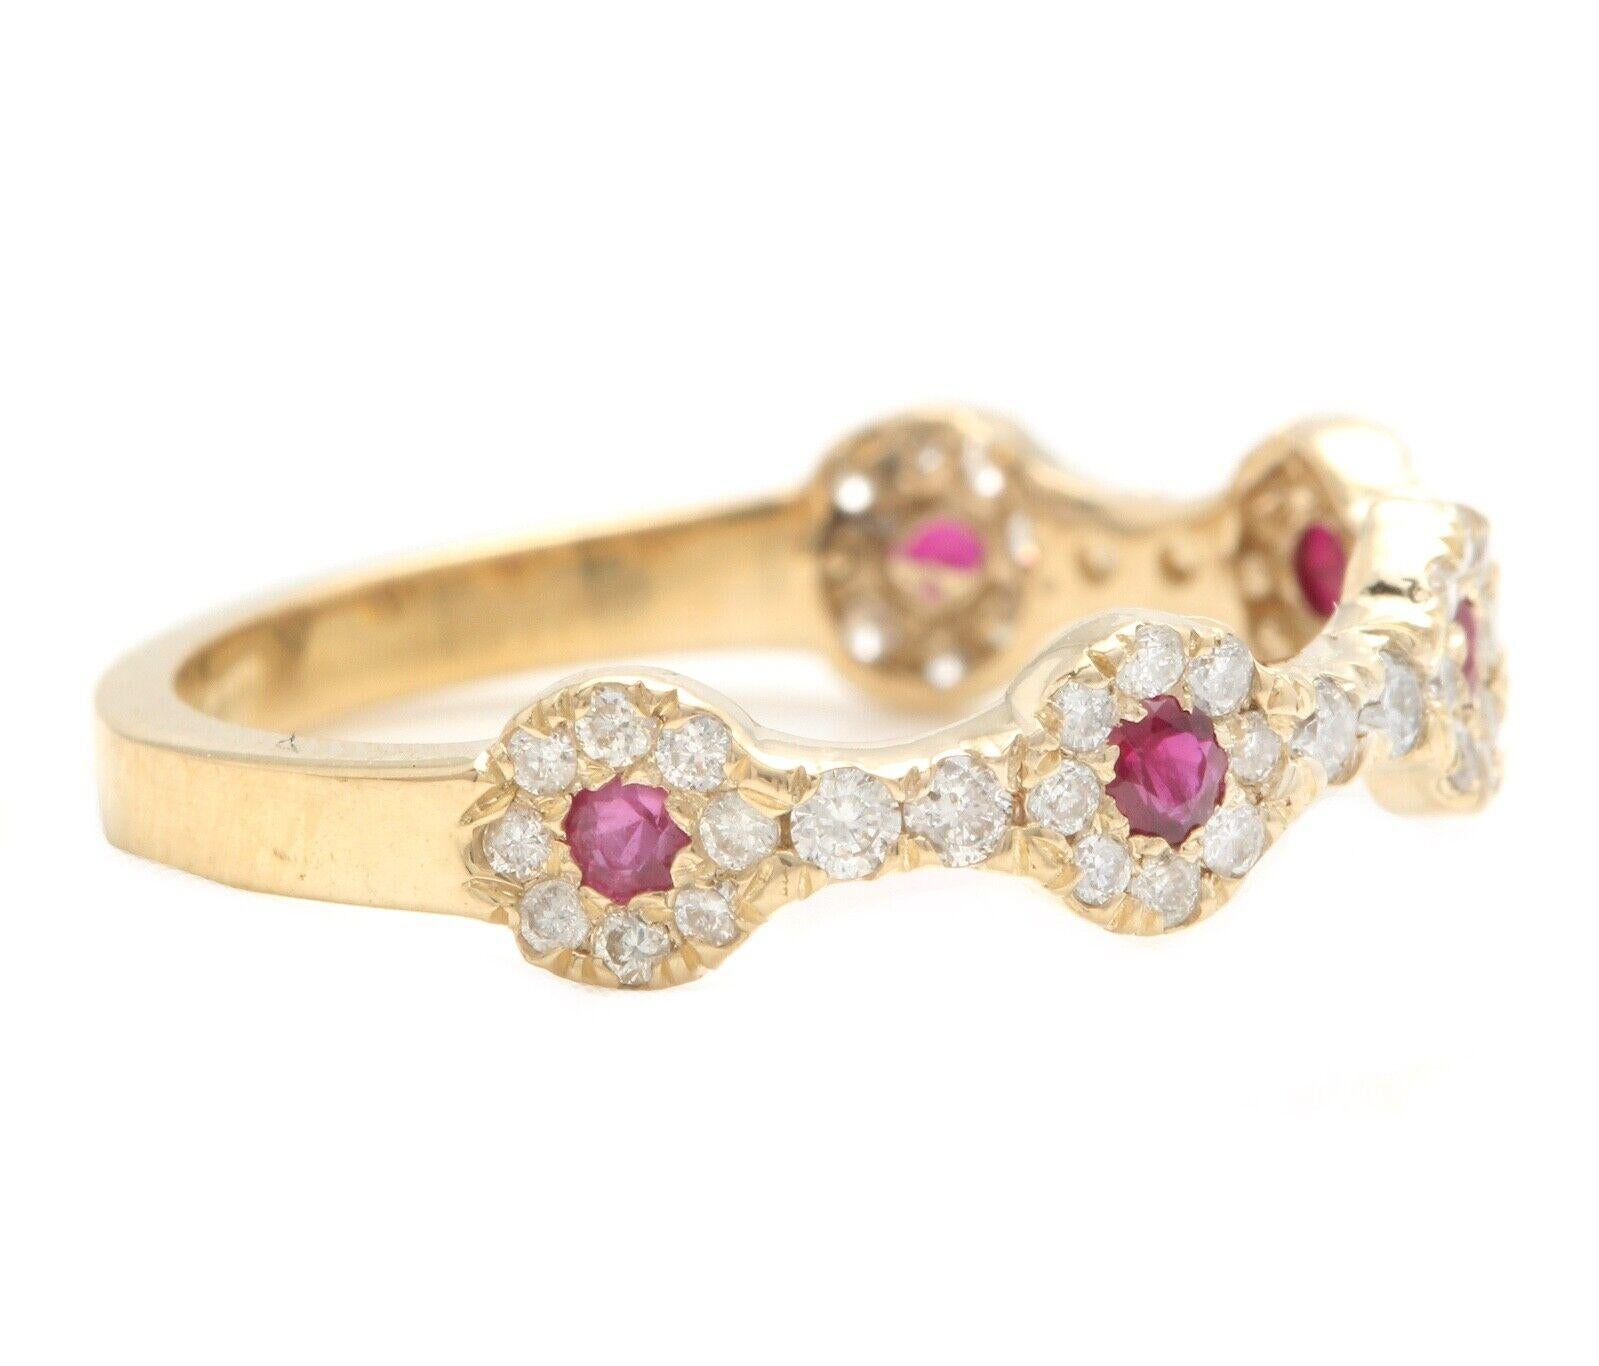 0.50 Carats Natural Ruby and Diamond 14K Solid Yellow Gold Band Ring

Suggested Replacement Value: $3,000.00

Total Natural Ruby Weight is: Approx. 0.15 Carats 

Natural Round Diamonds Weight: Approx. 0.35 Carats (color G-H / Clarity SI)

Width of